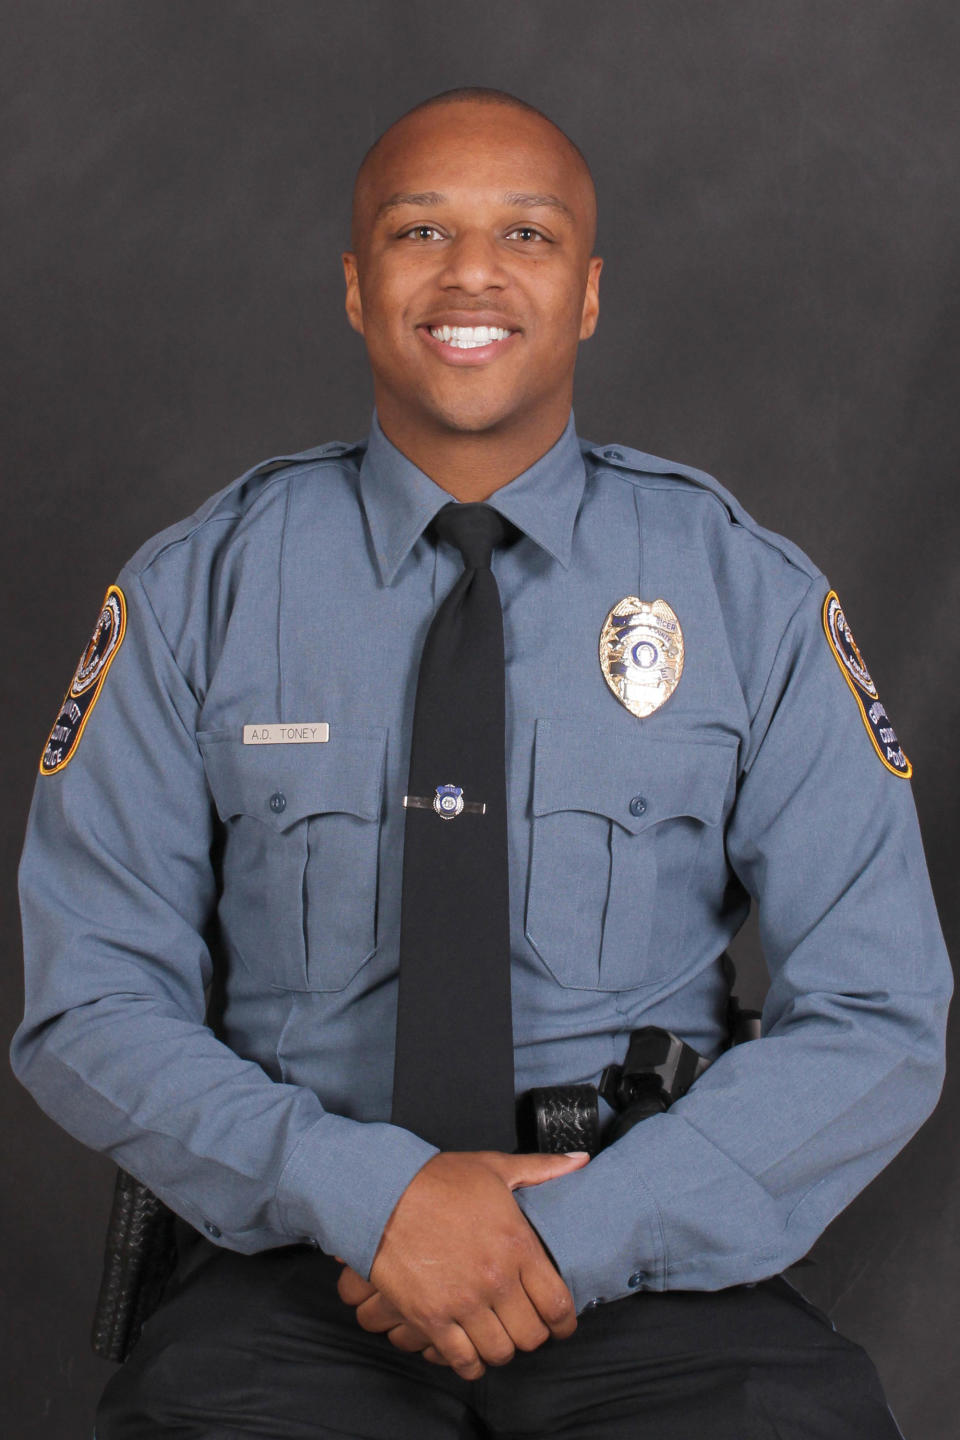 This undated photo provided by the Gwinnett County Police Department on Saturday, Oct. 20, 2018 shows Officer Antwan Toney. On Saturday, Toney was killed after being shot while responding to a suspicious vehicle parked near a middle school. (Gwinnett County Police Department via AP)